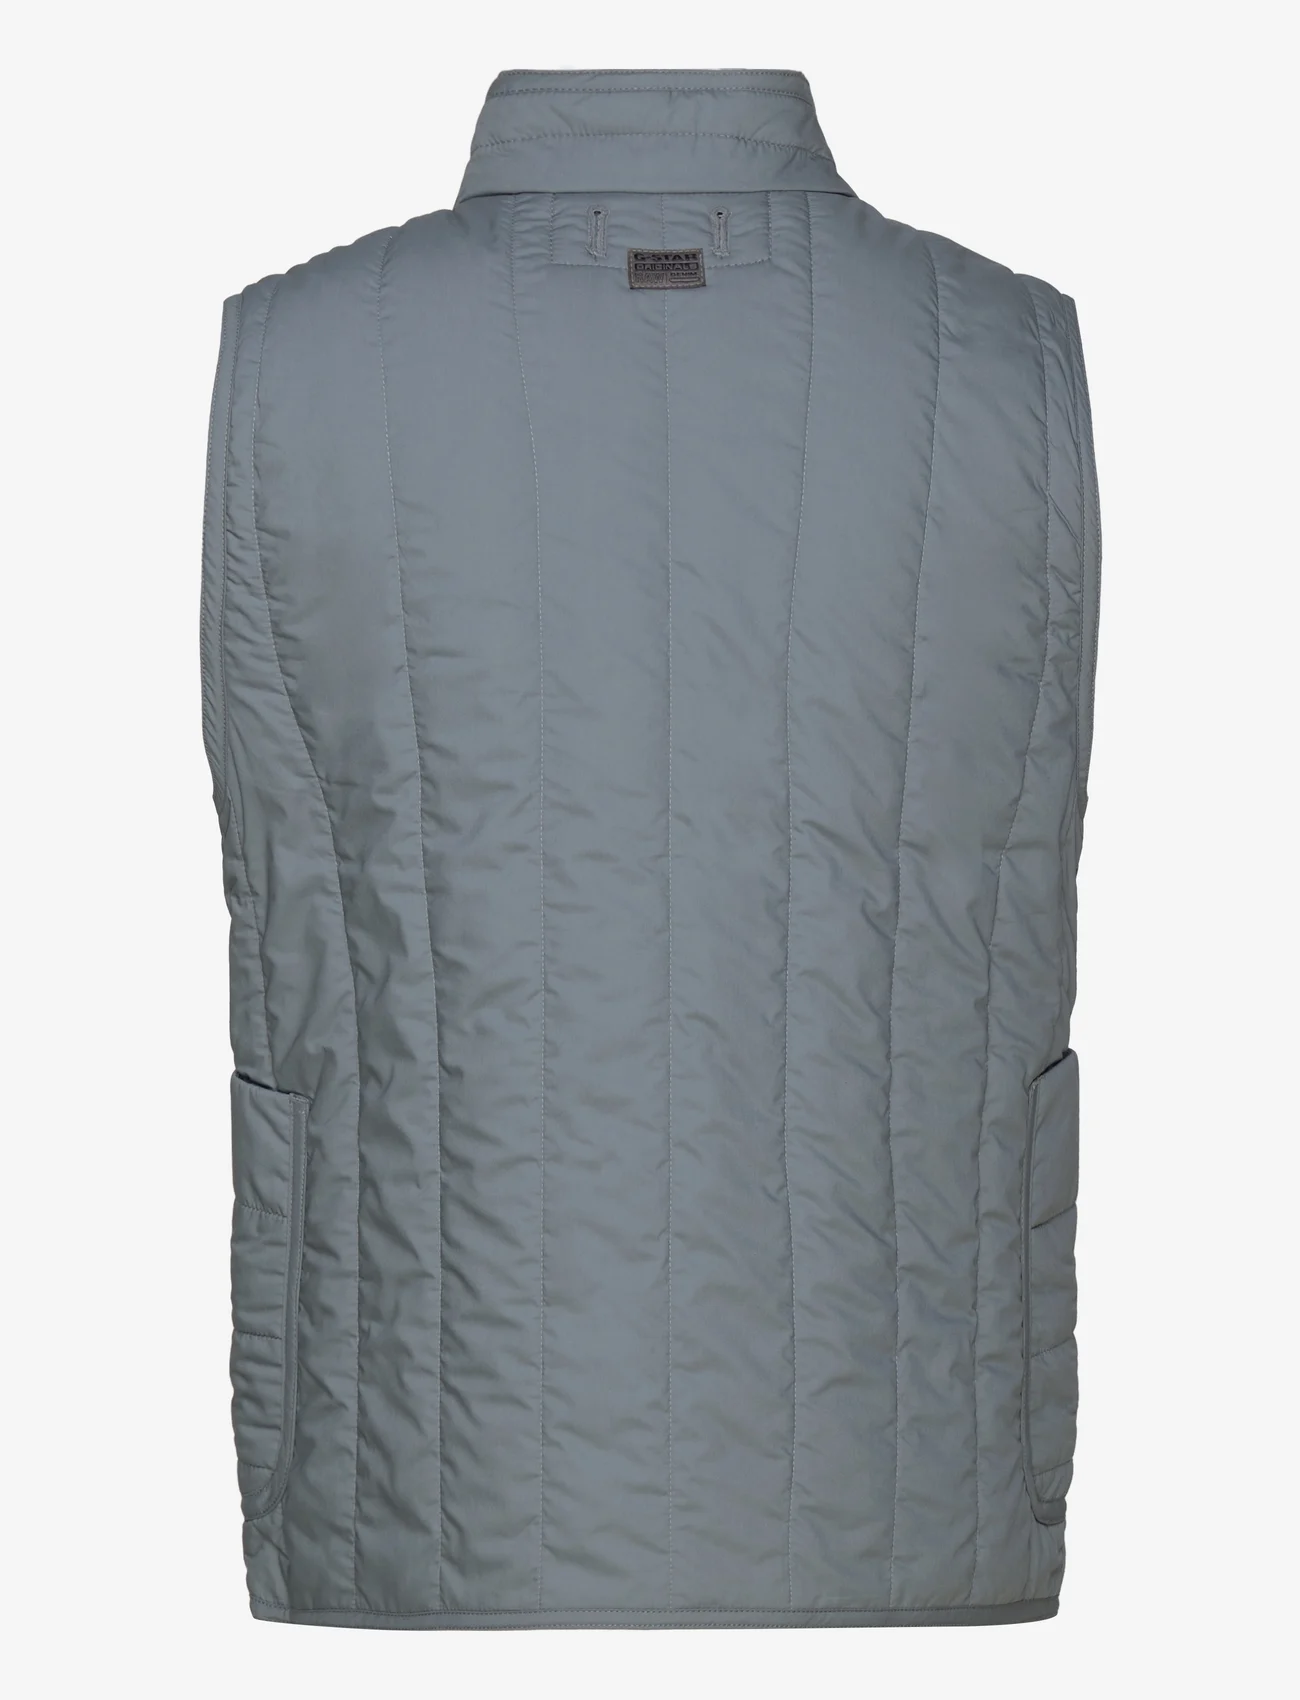 G-Star RAW - Liner vest - bodywarmers - axis - 1